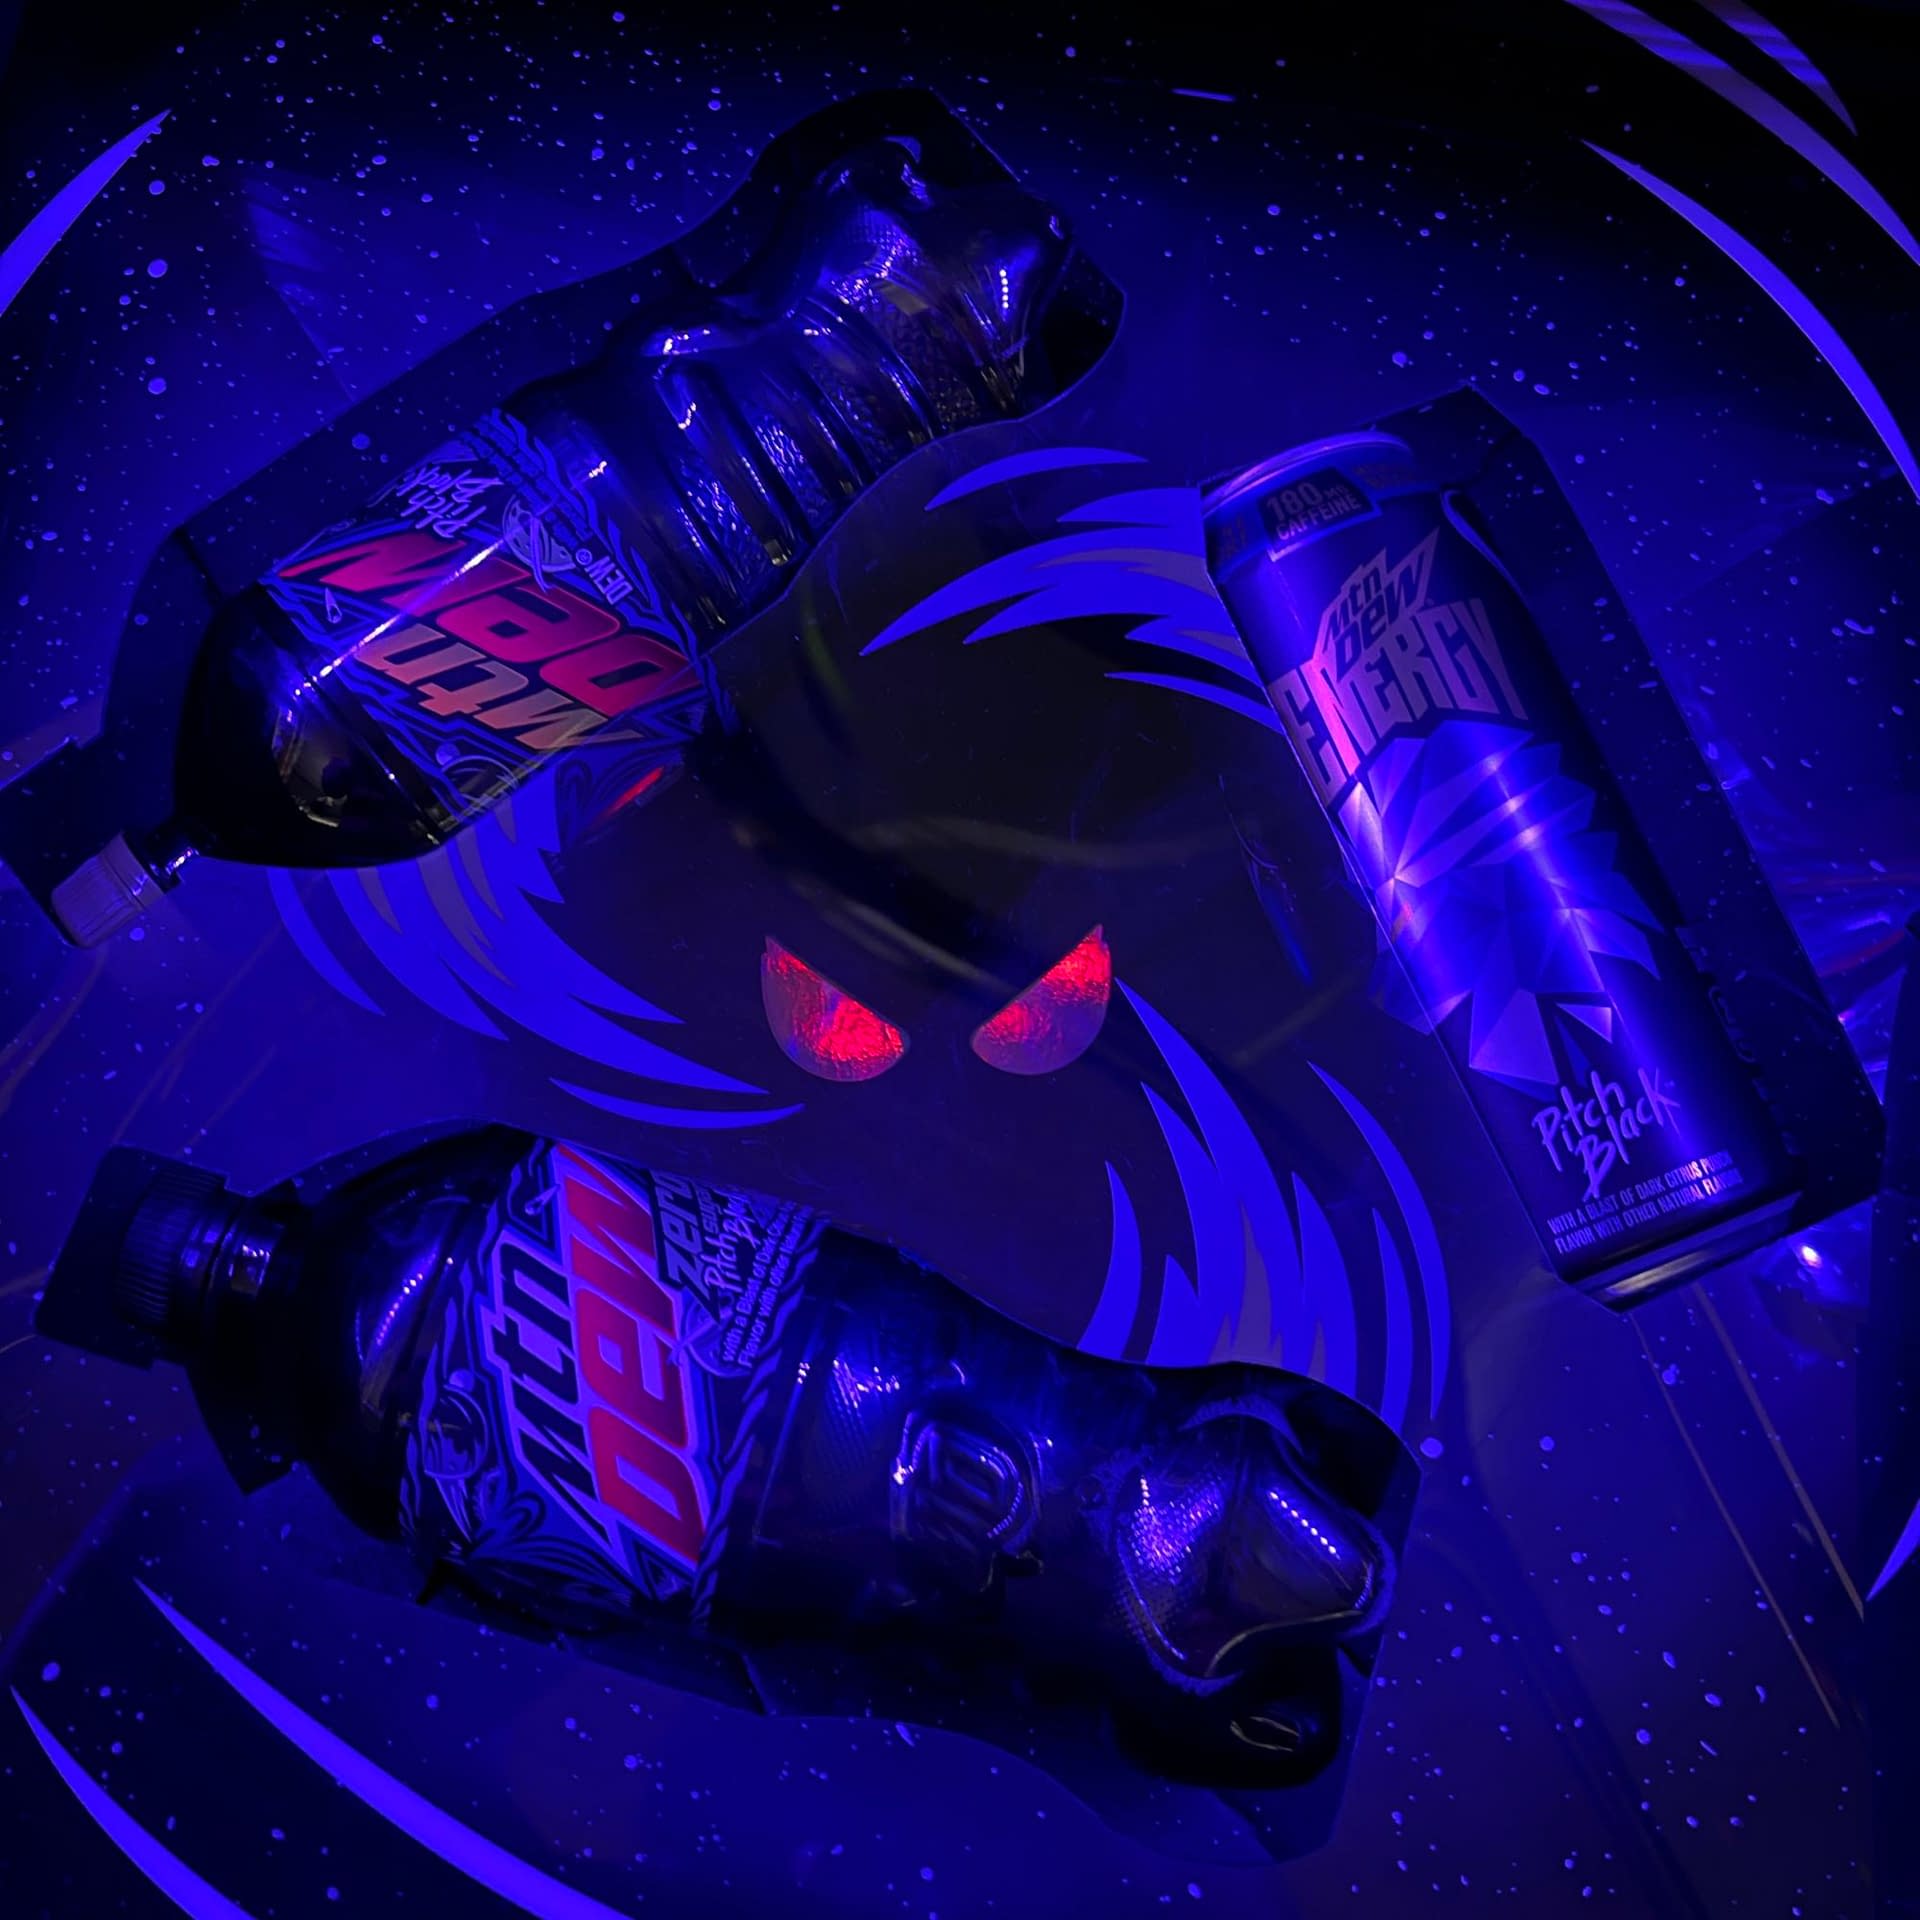 It's Official! MTN Dew Pitch Black Returns to Stores in 2023